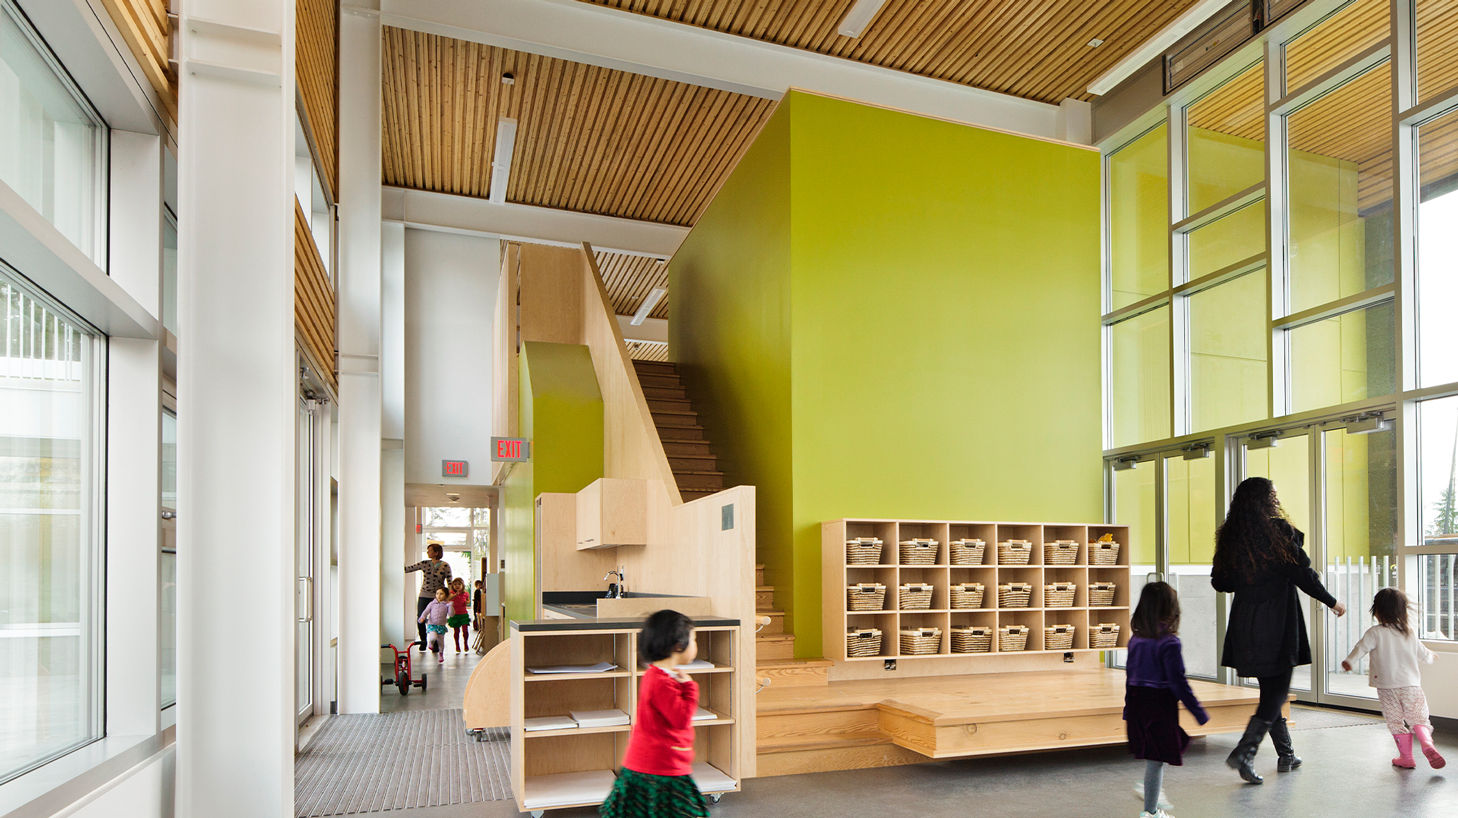 Interior with a family walking past a wooden staircase and neon green wall